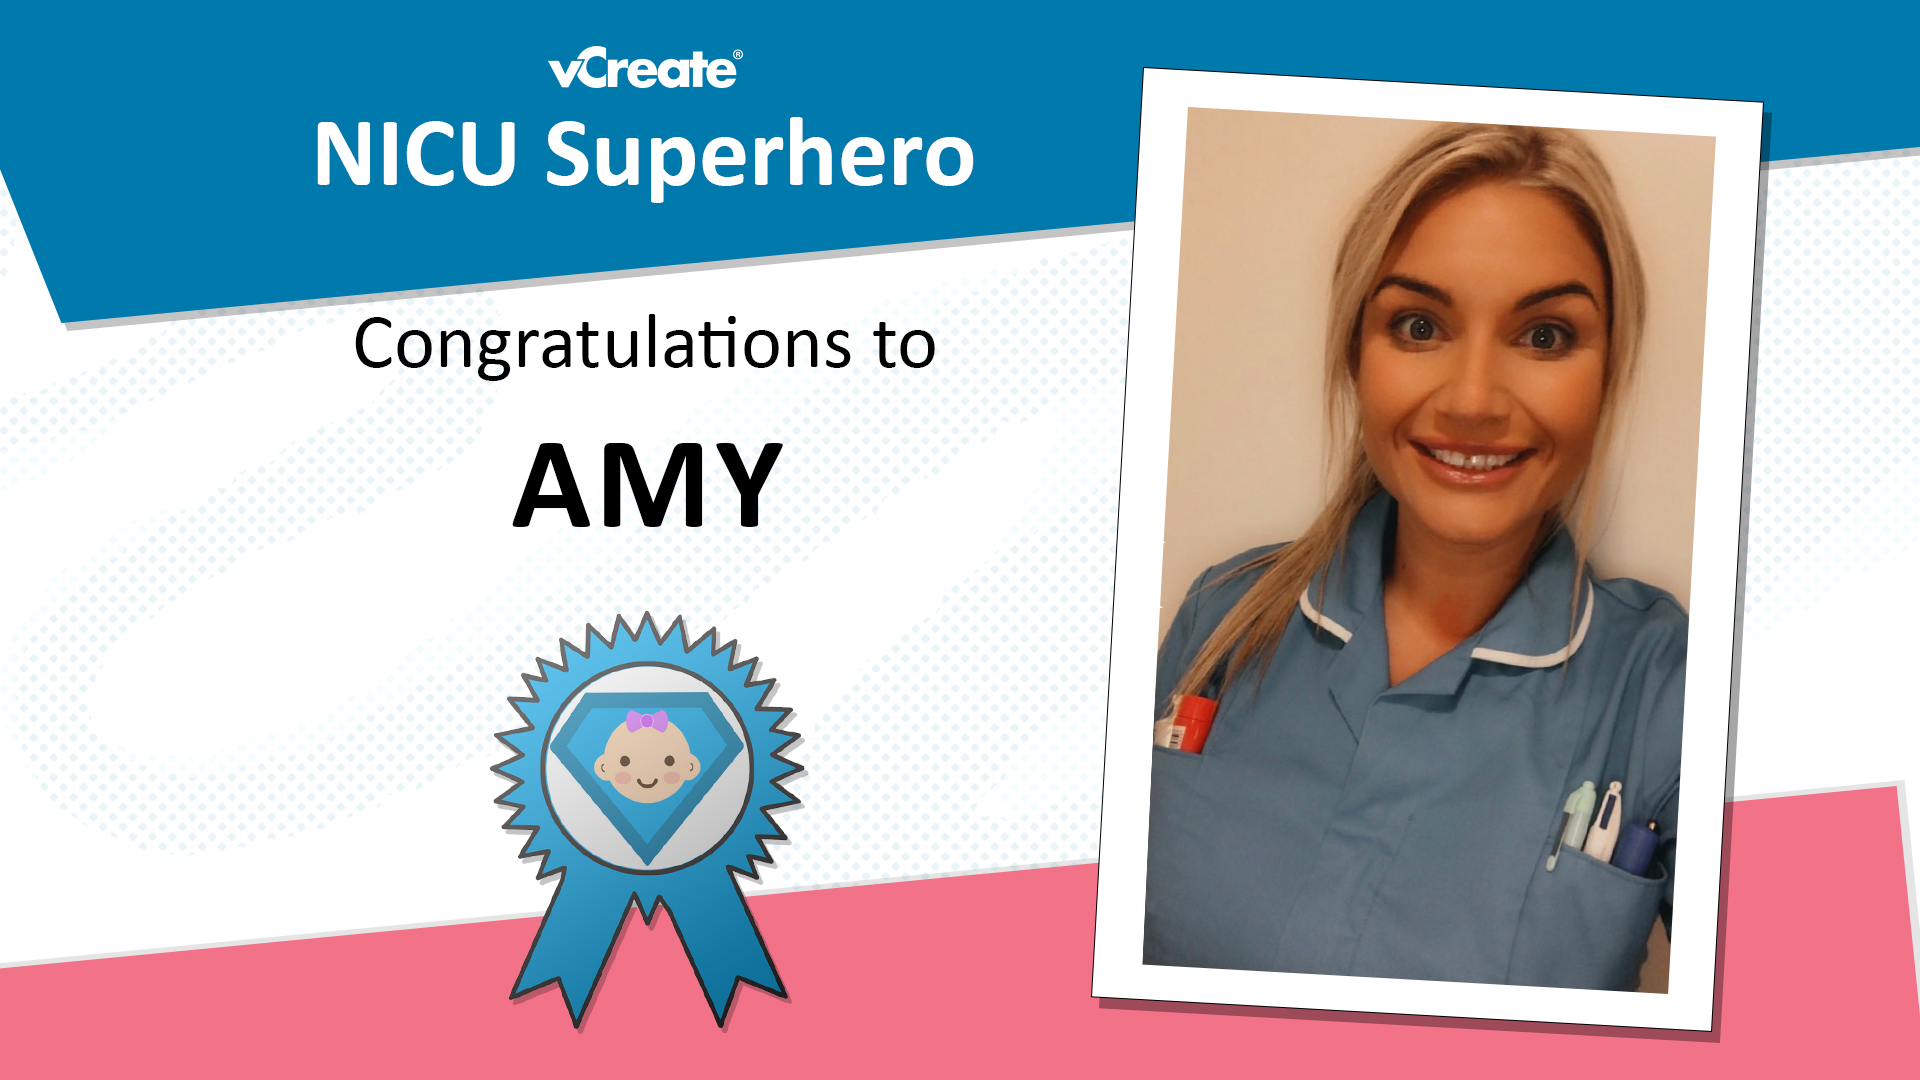 Amy from Royal Stoke University Hospital is crowned NICU Superhero for the second time!